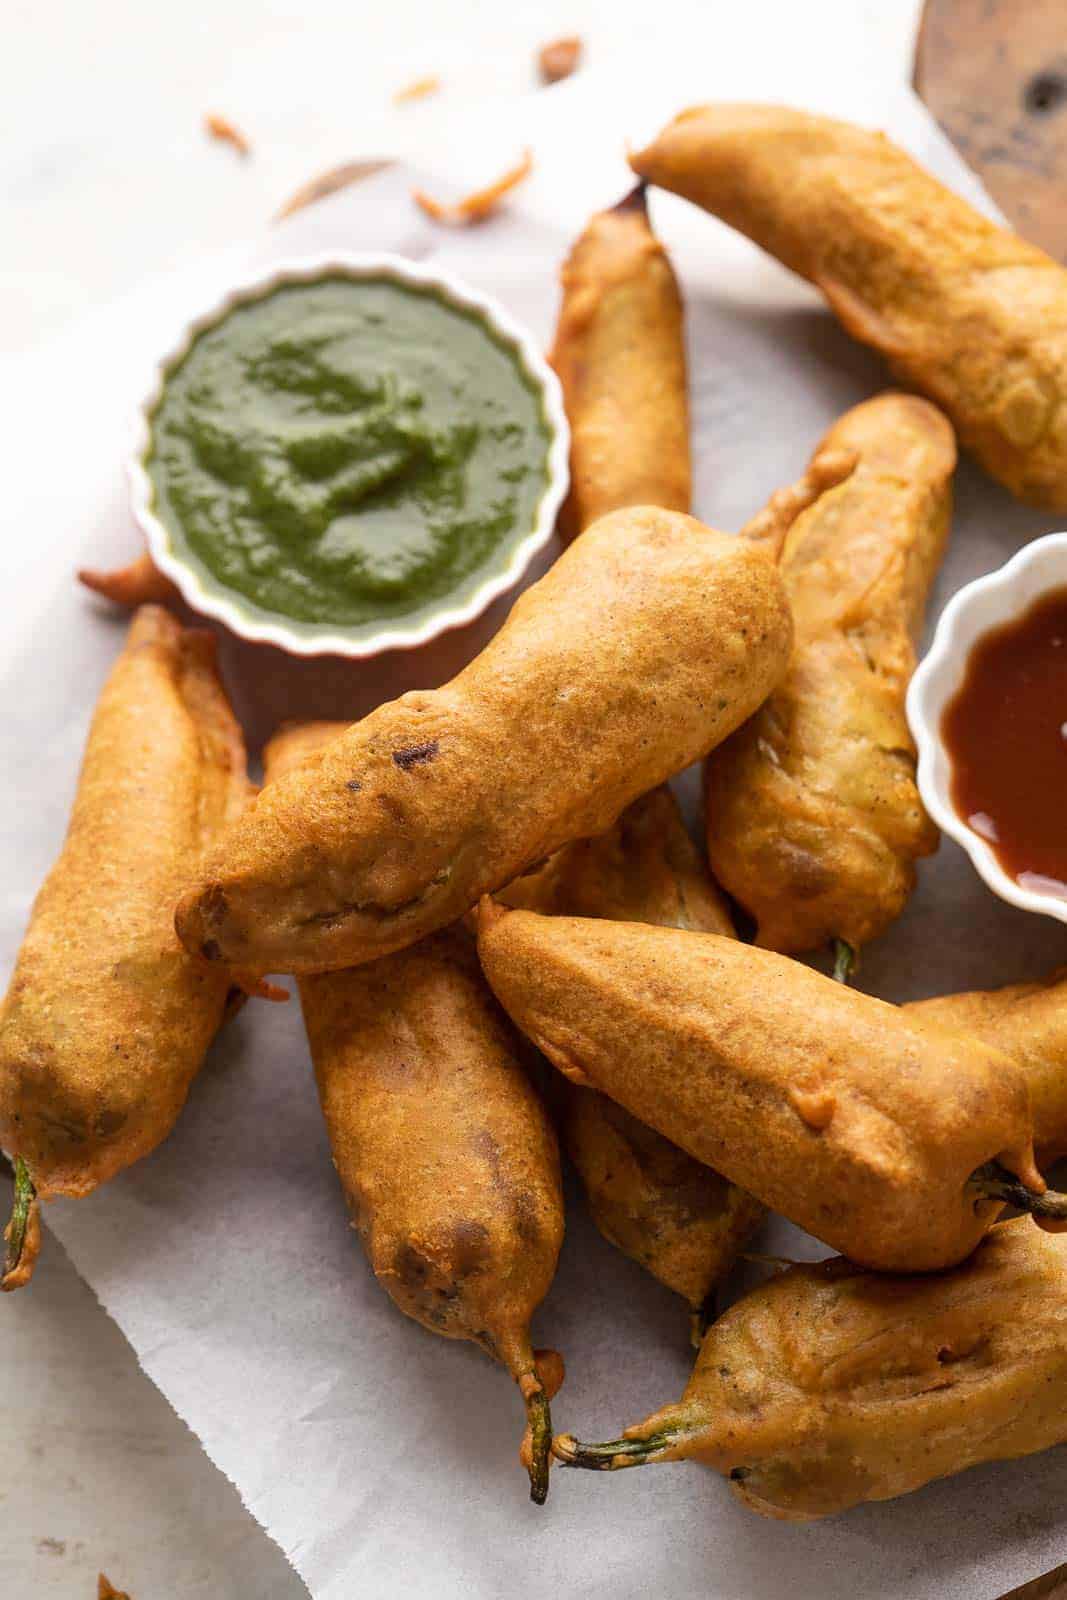 Mirchi bajjis served on parchment paper with green chutney and ketchup